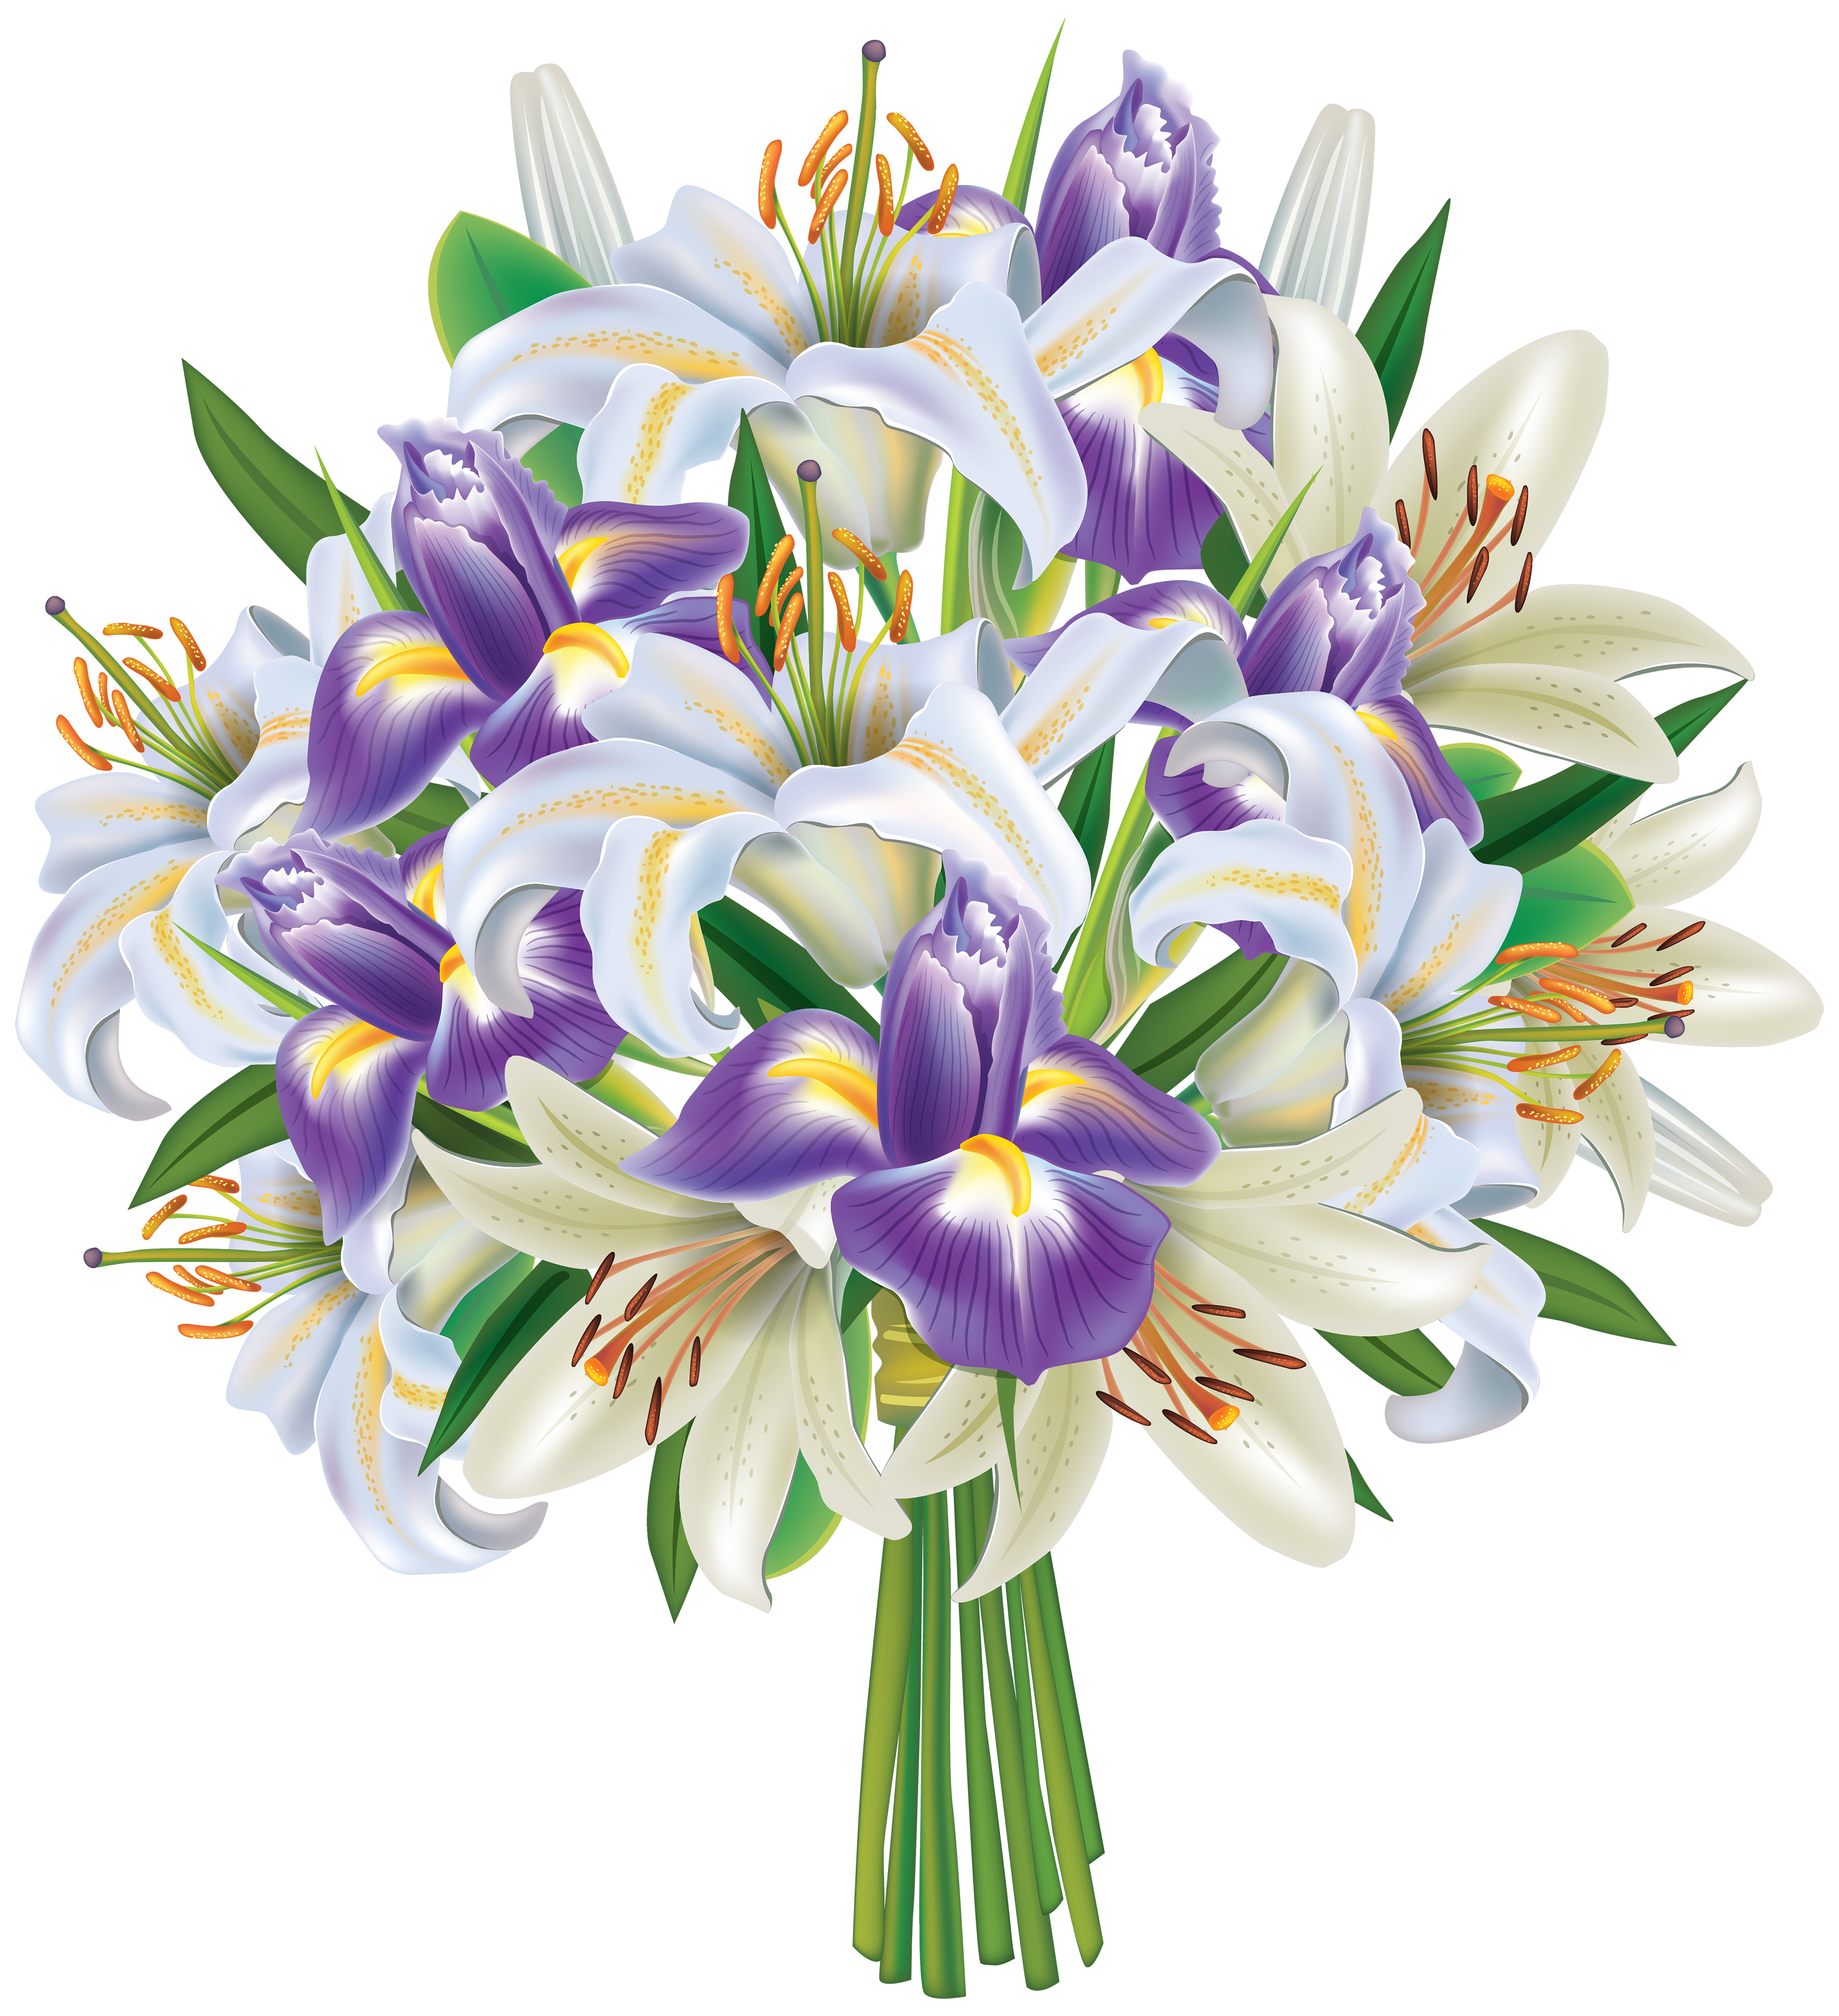 Purple iris flowers and. Lily clipart flower bunch